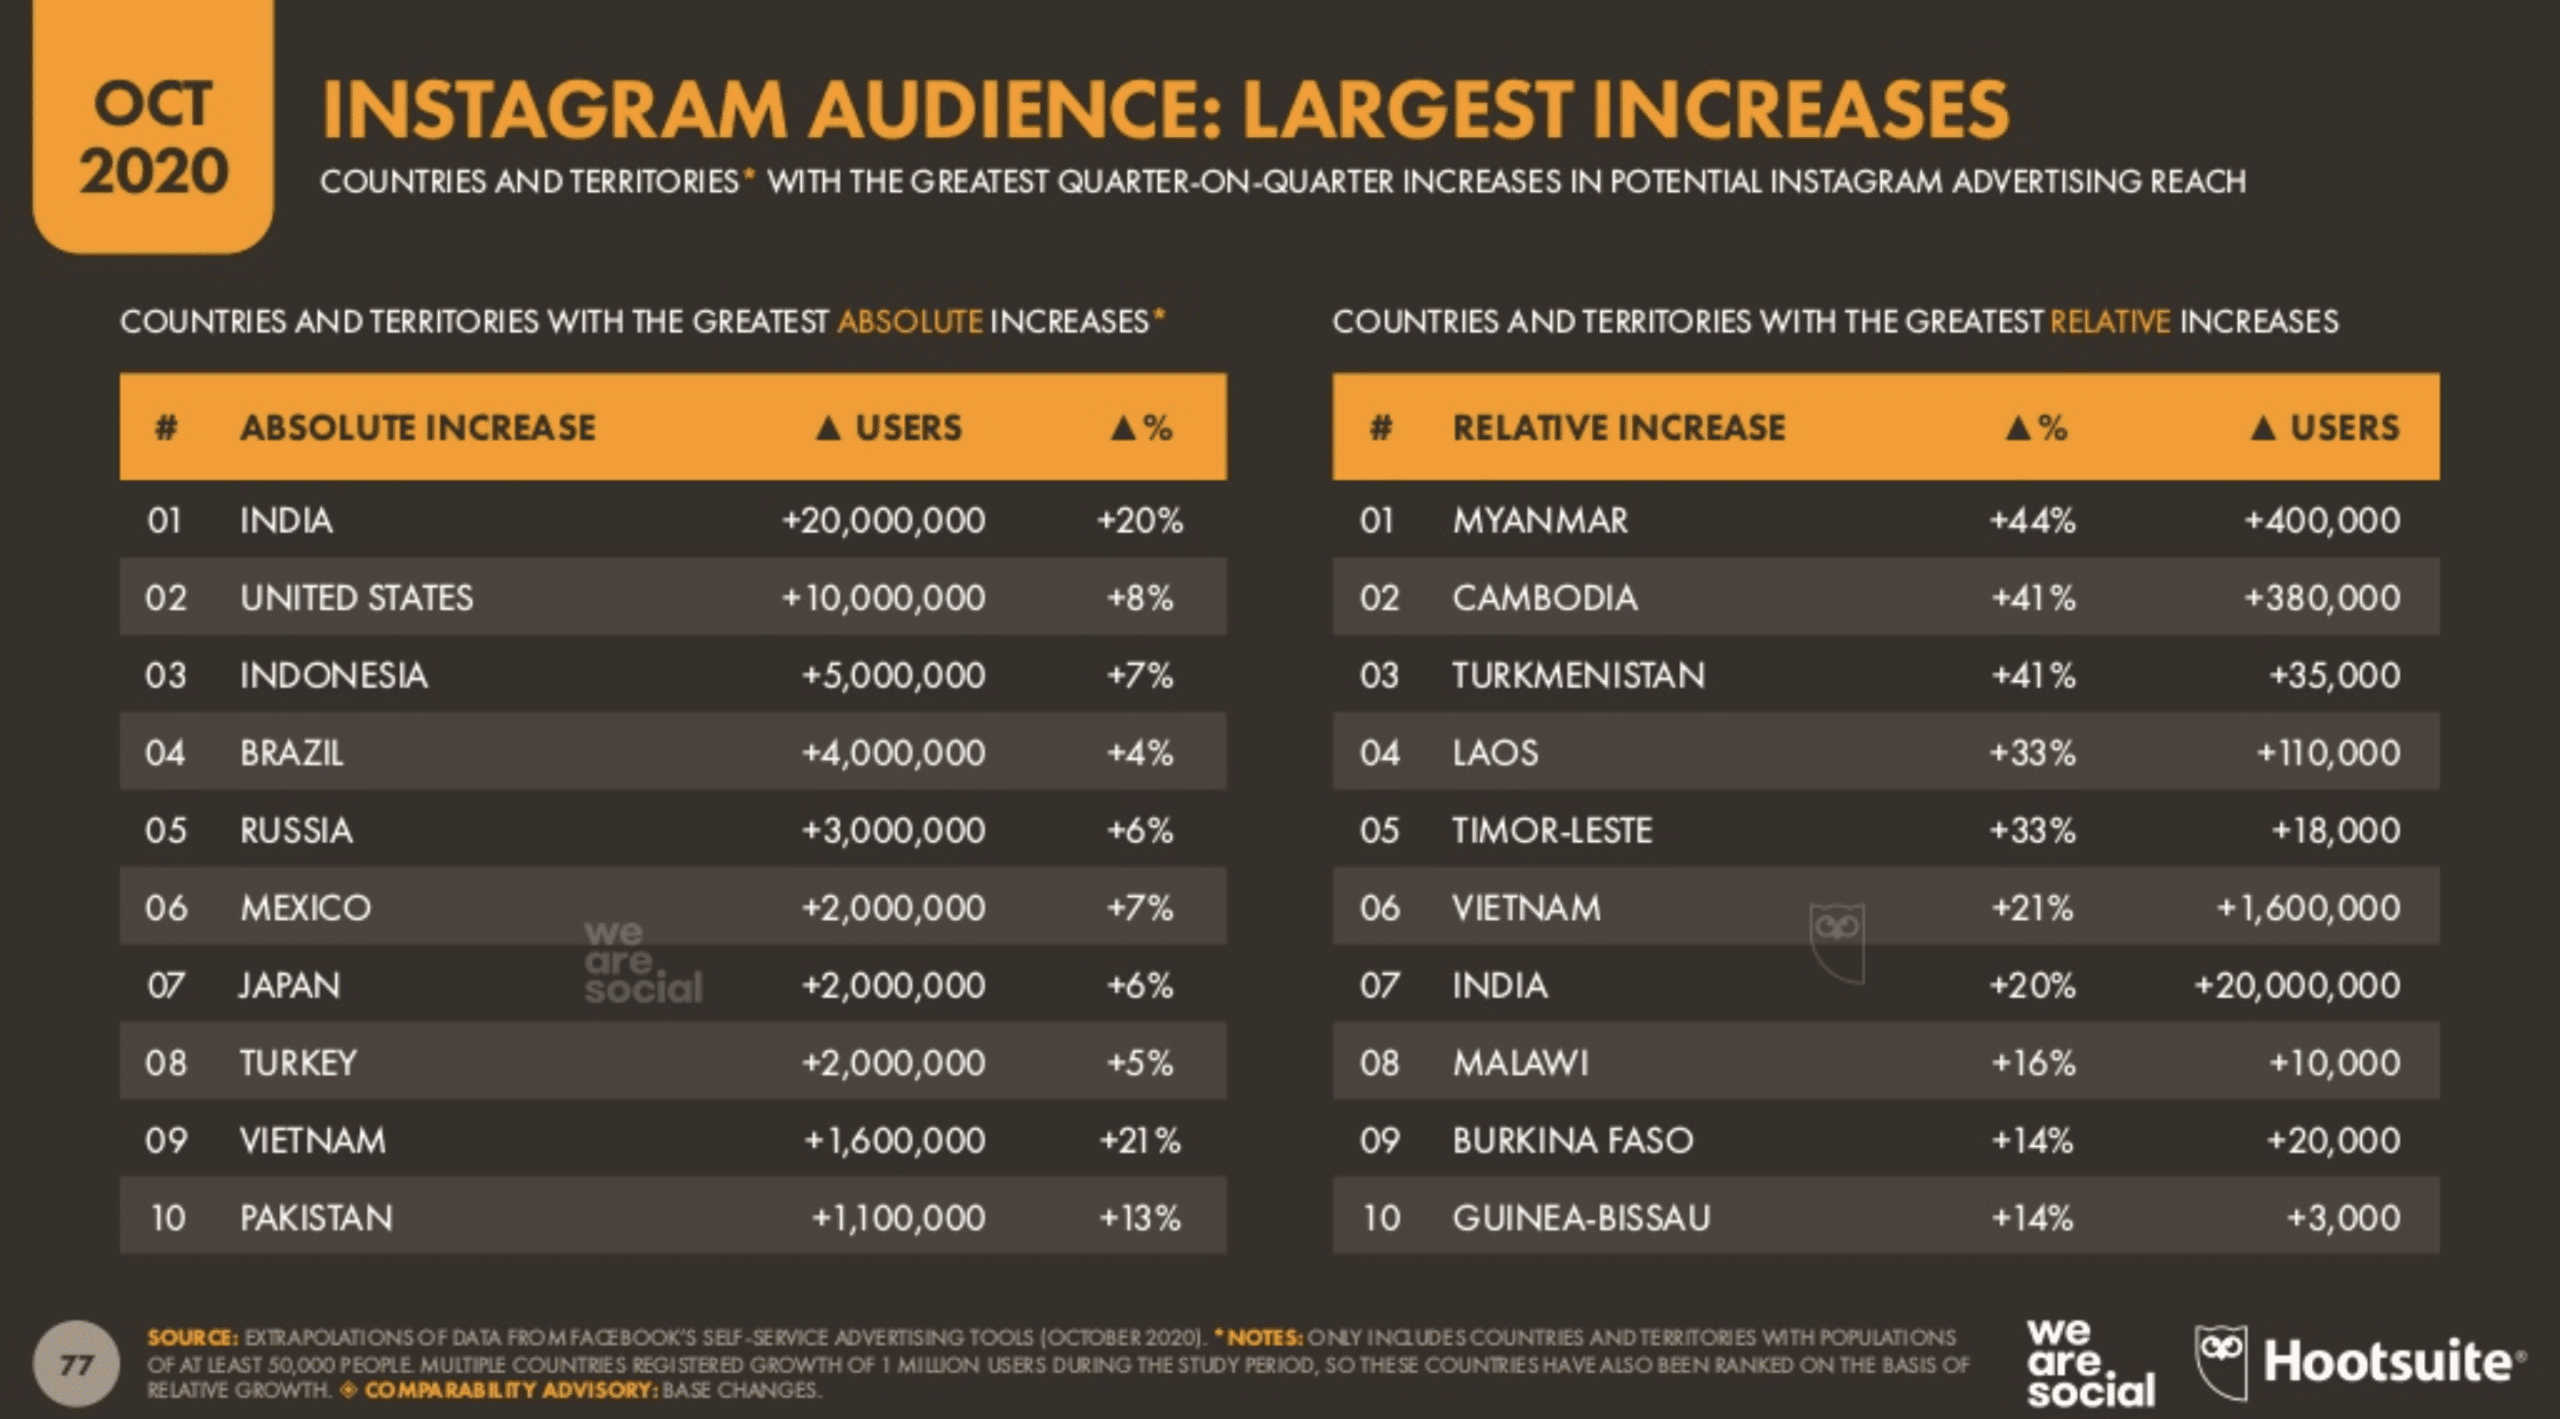 Instagram audiences with largest increases in advertising reach